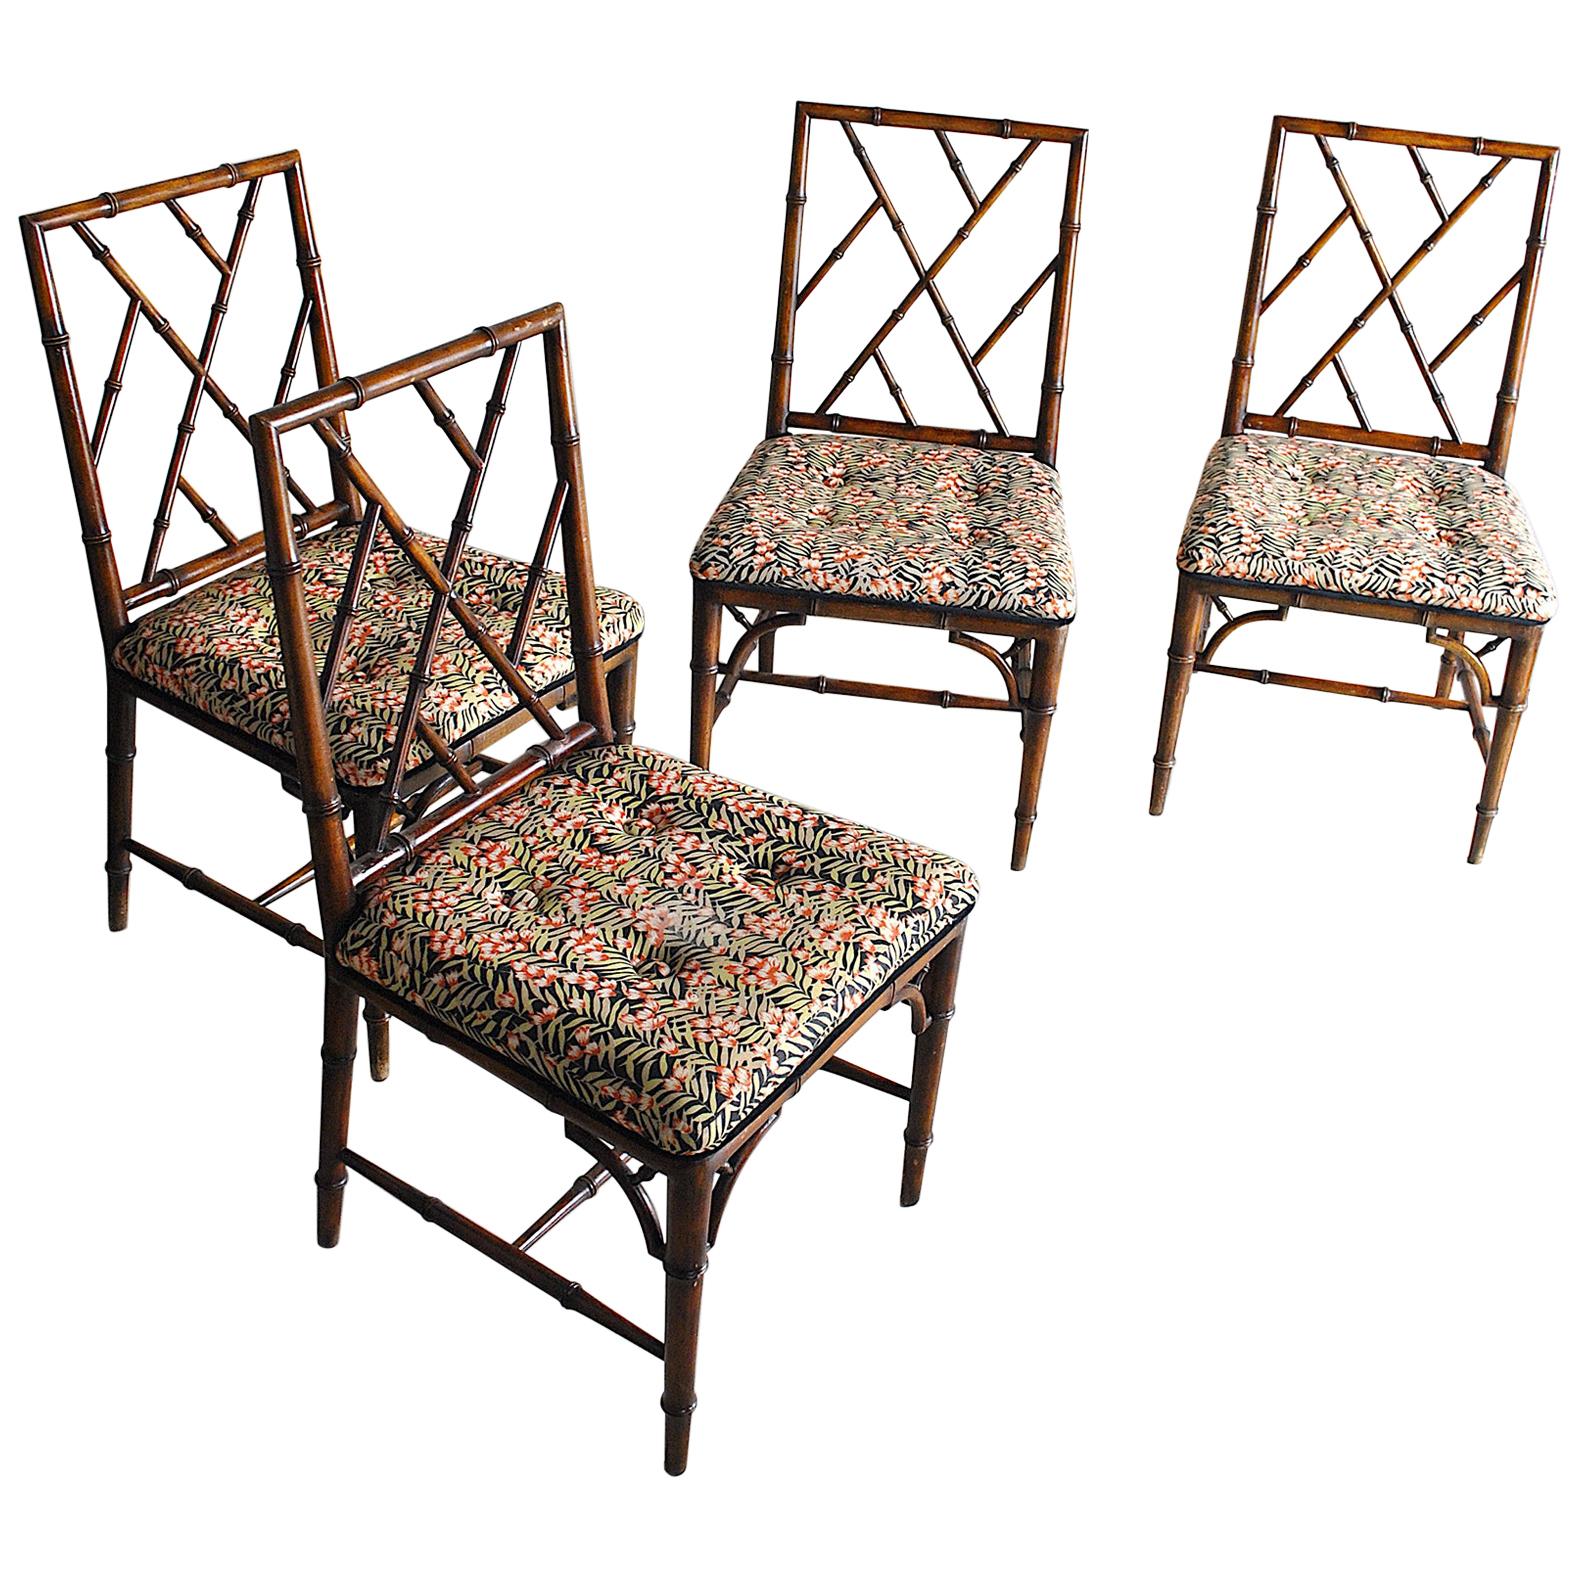 Italian Midcentury Set of 4 Chairs in Bamboo